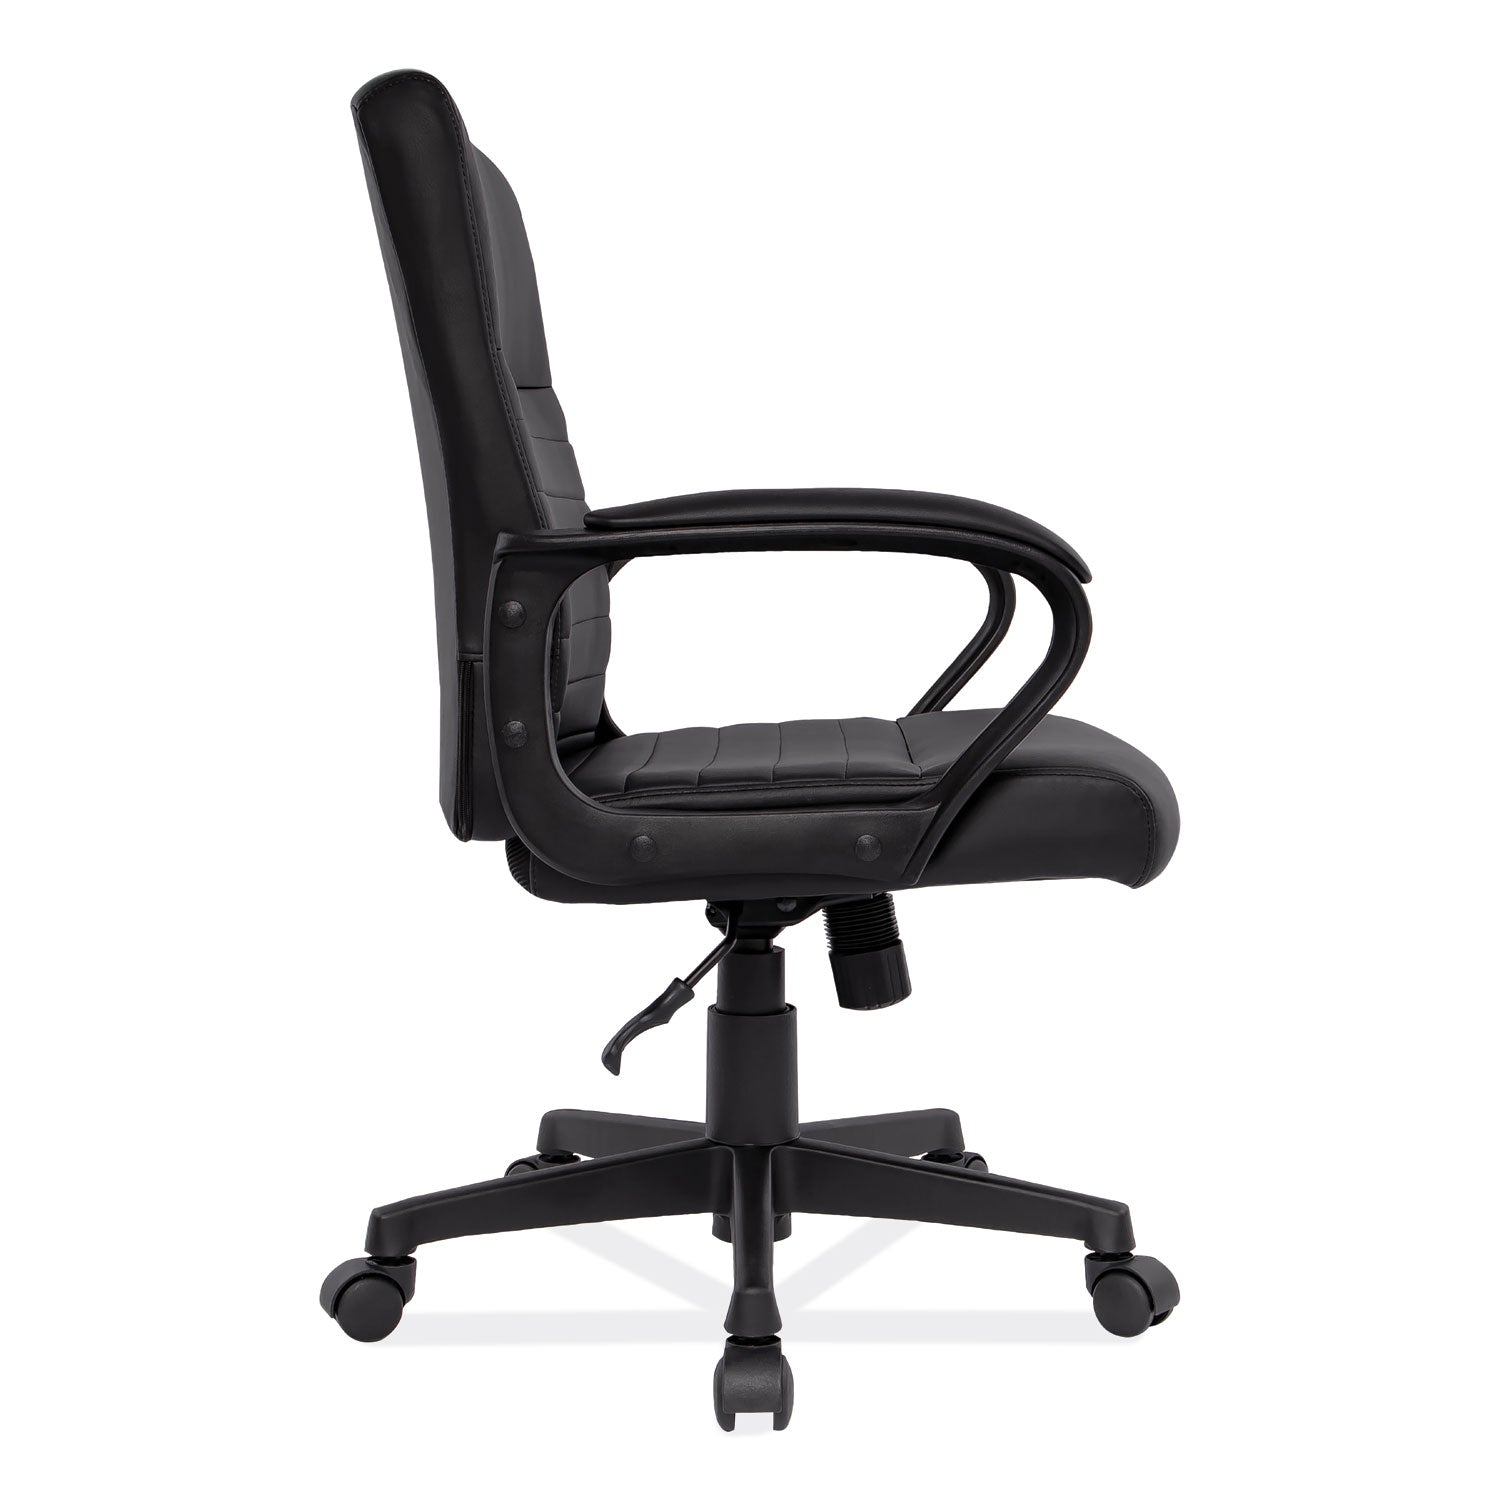 Alera Breich Series Manager Chair, Supports Up to 275 lbs, 16.73" to 20.39" Seat Height, Black Seat/Back, Black Base - 3